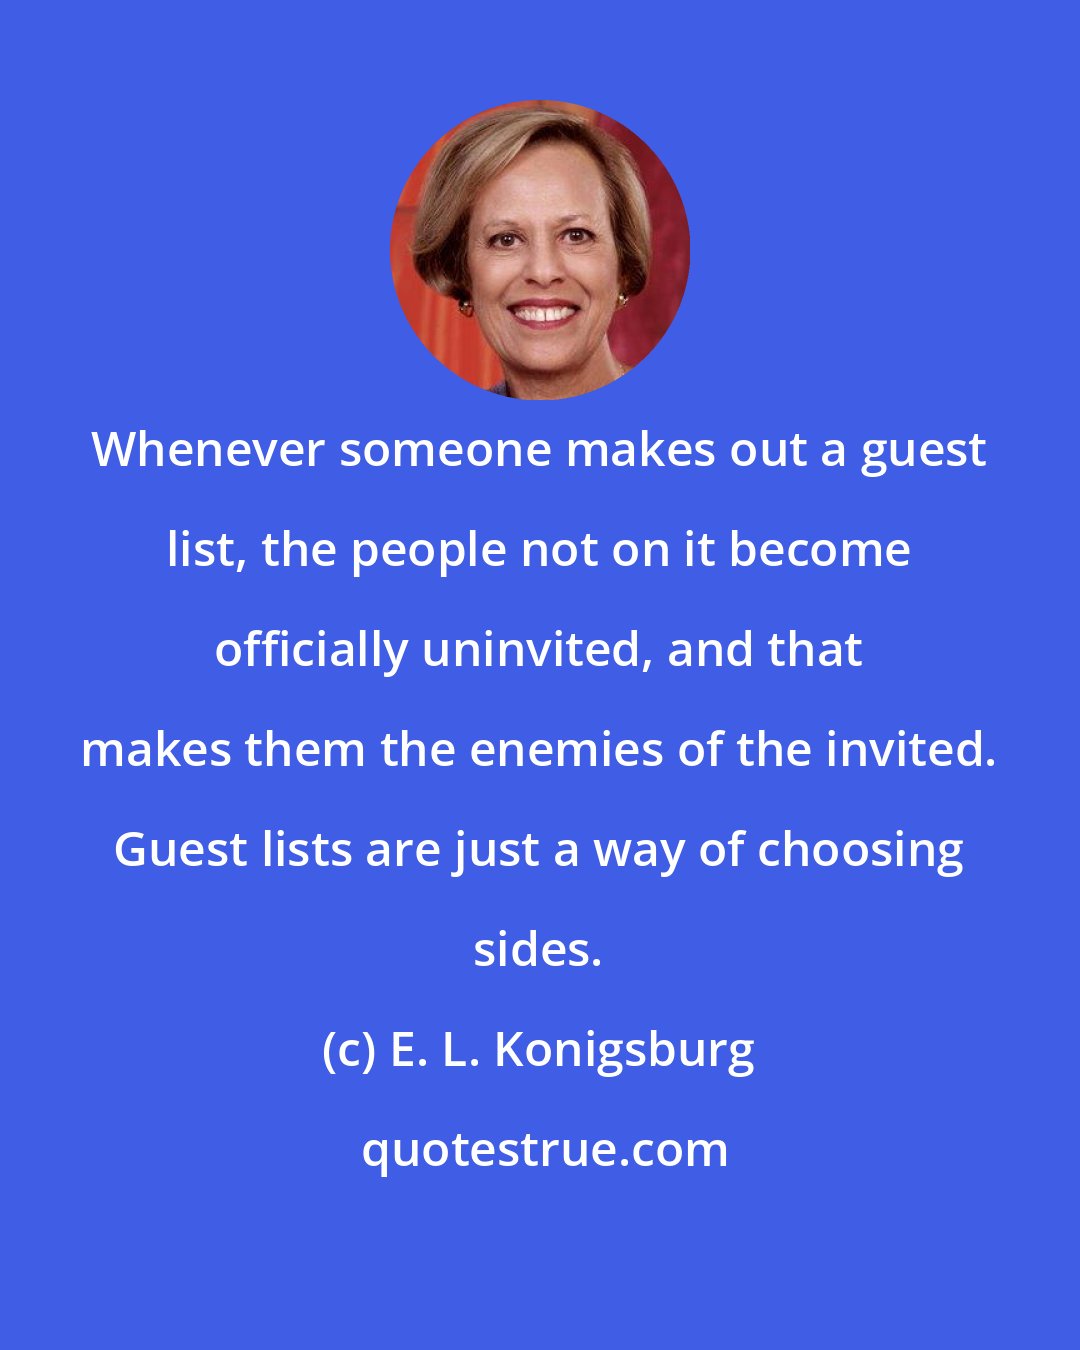 E. L. Konigsburg: Whenever someone makes out a guest list, the people not on it become officially uninvited, and that makes them the enemies of the invited. Guest lists are just a way of choosing sides.